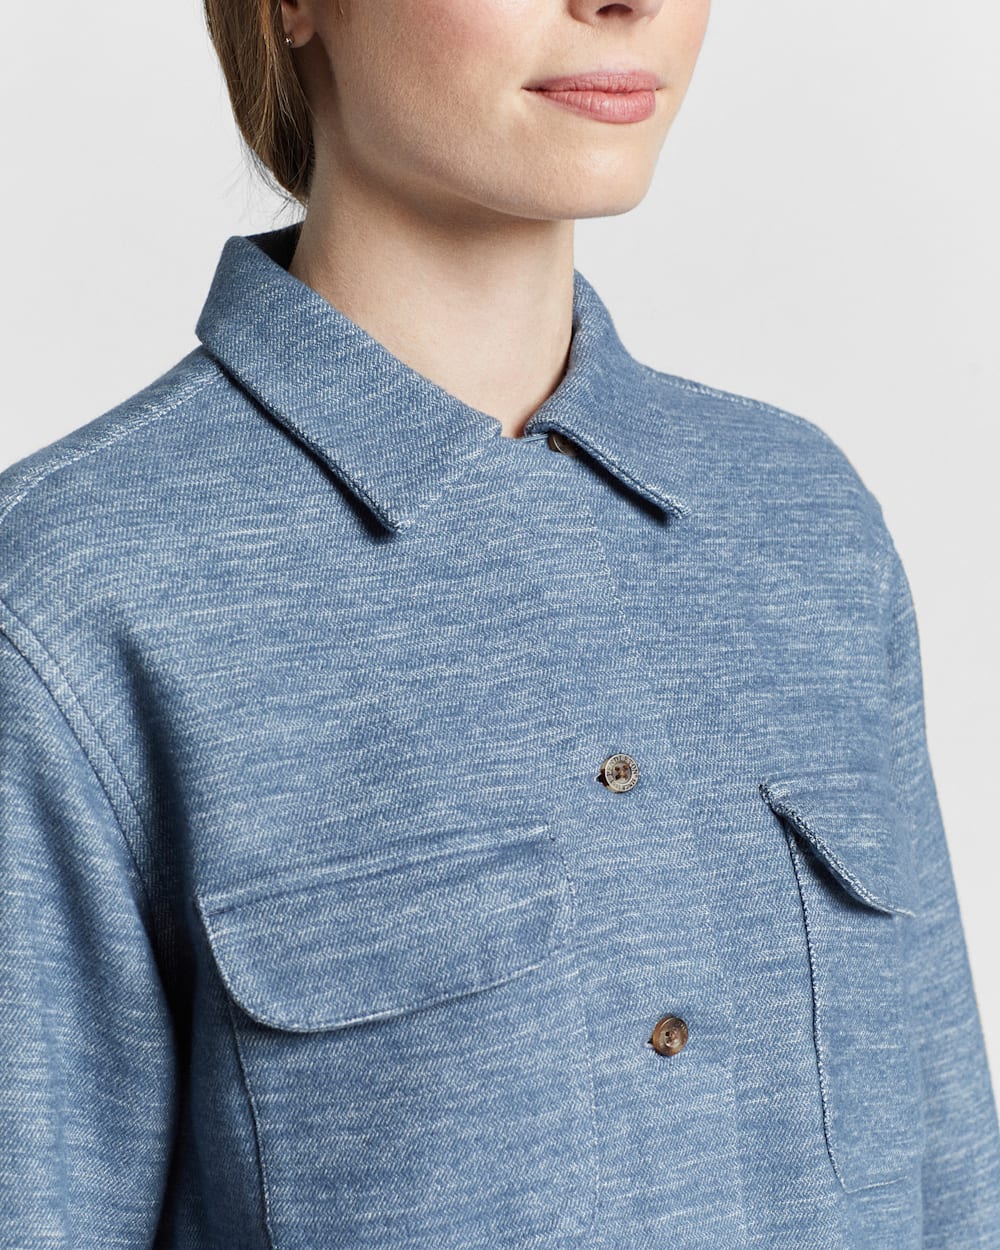 ALTERNATE VIEW OF WOMEN'S SOLID DOUBLESOFT BOARD SHIRT IN BERING SEA BLUE image number 4